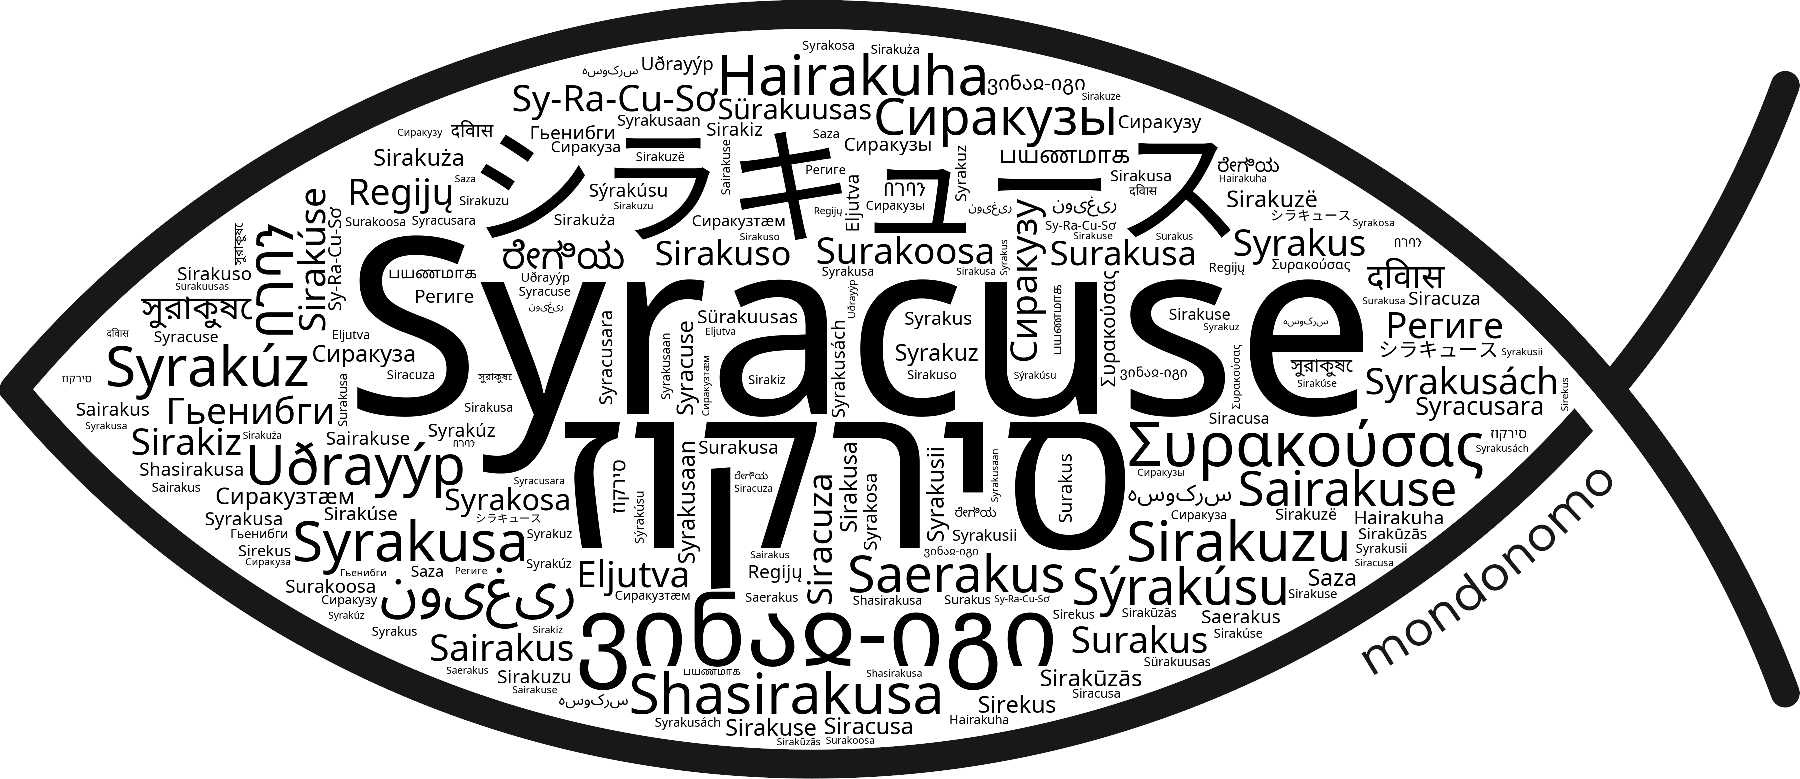 Name Syracuse in the world's Bibles